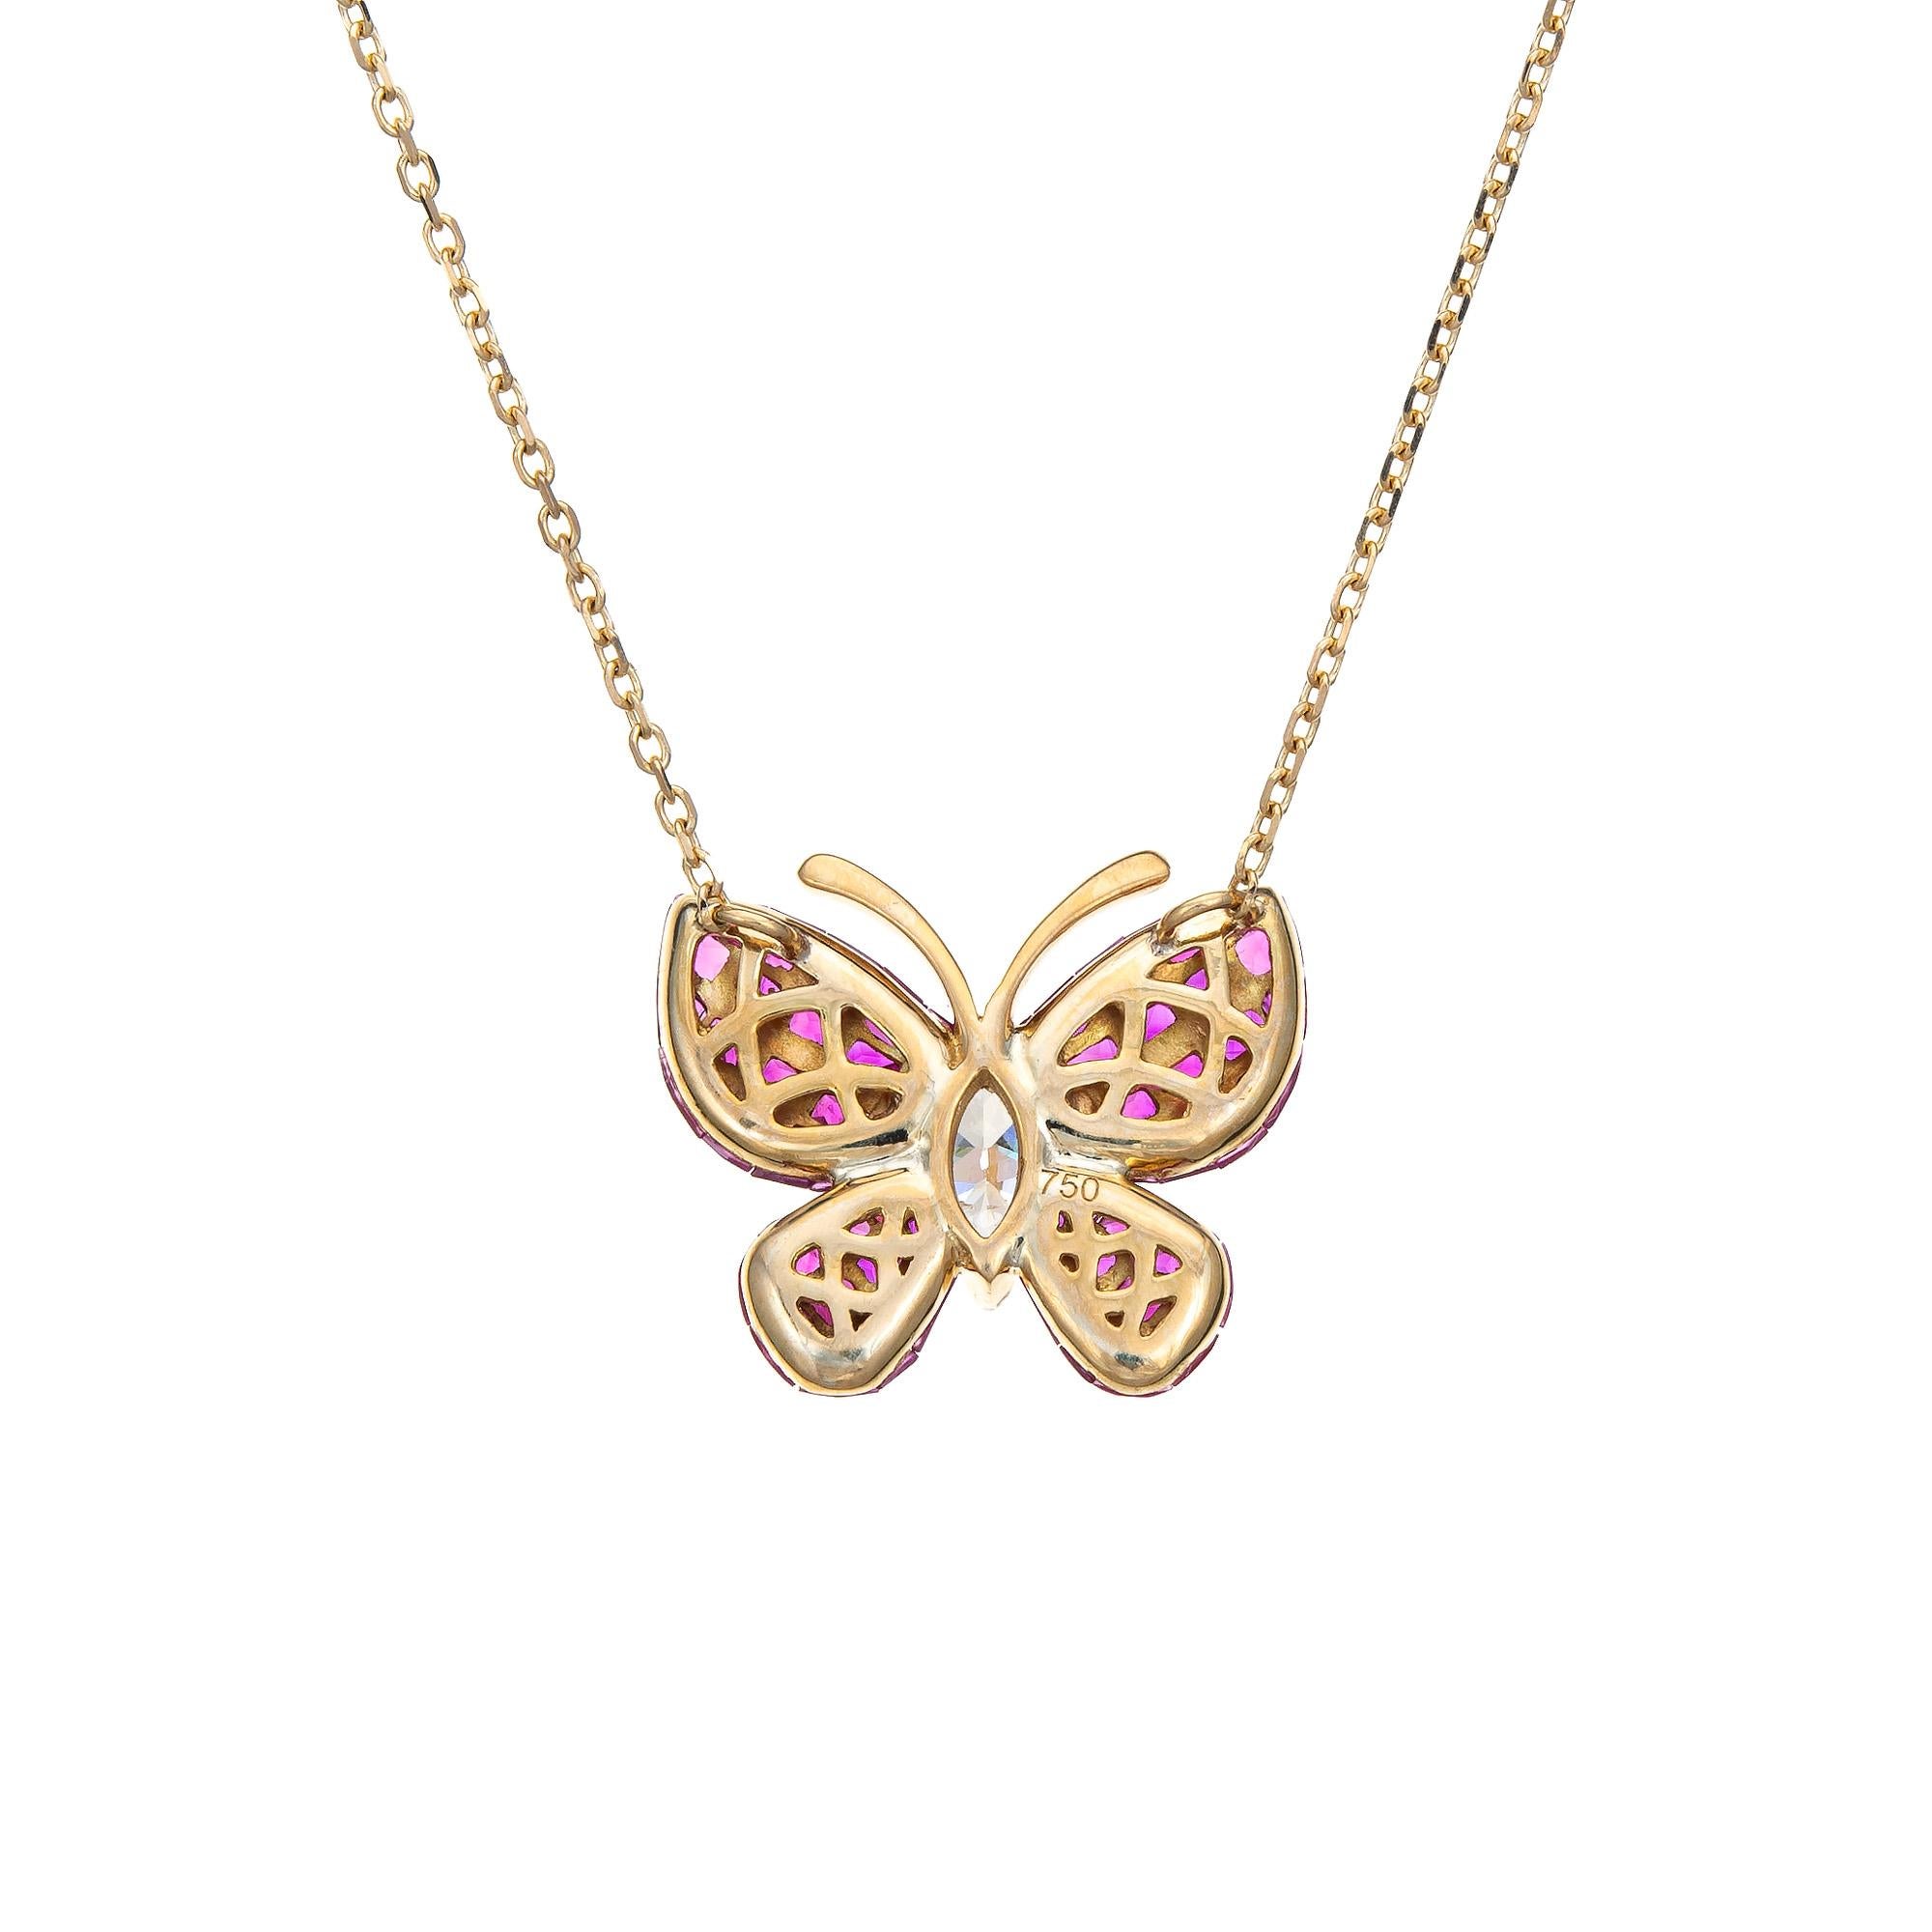 Finely detailed invisible set ruby & diamond butterfly necklace crafted in 18 karat yellow gold. 

Invisible set rubies range in size from 1.5mm to 2.5mm. One marquise cut diamond is estimated at 0.40 carats (I-J color and SI2 clarity). The rubies